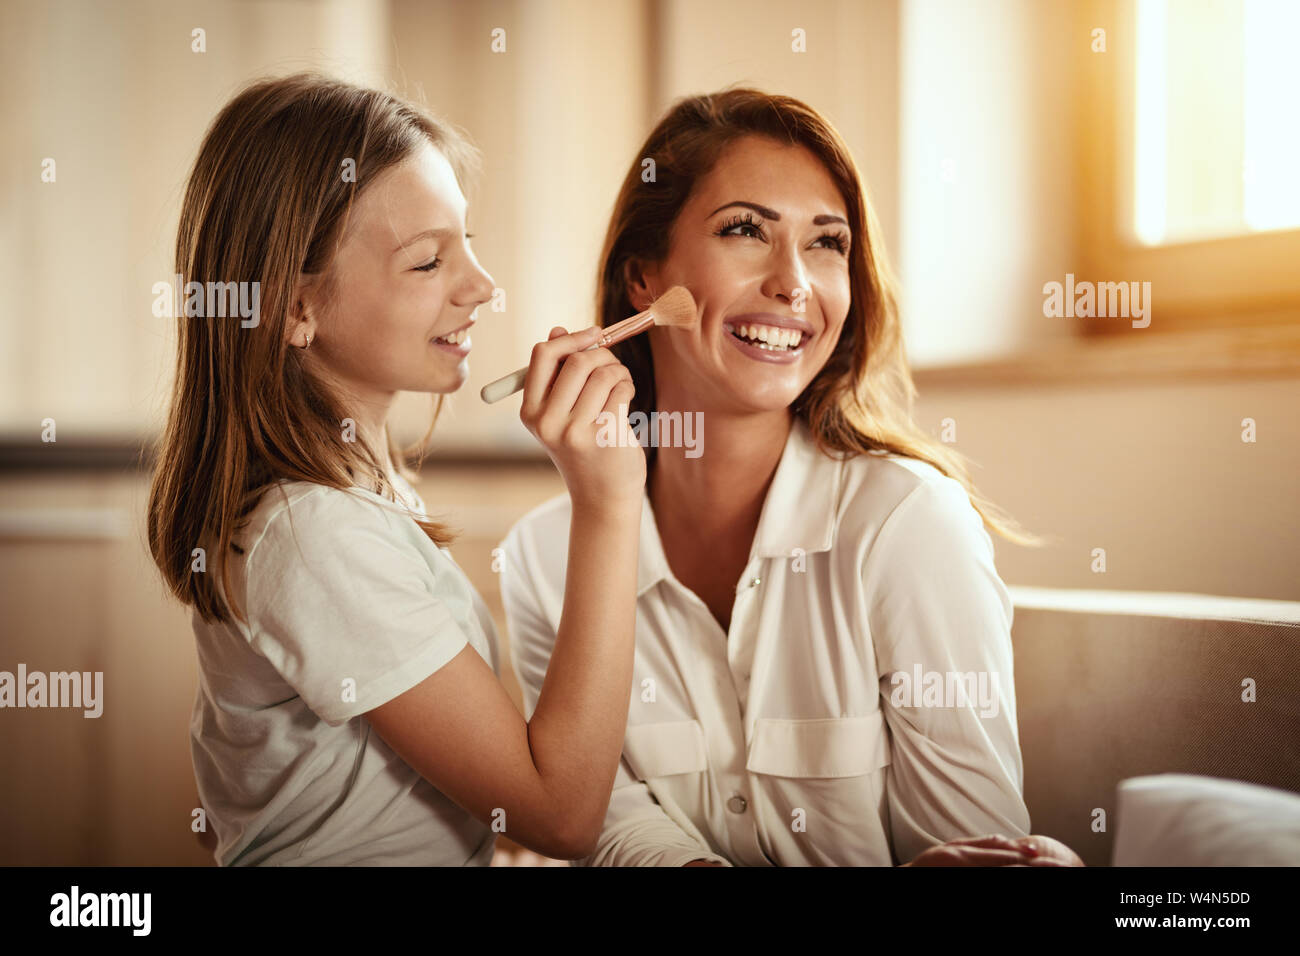 Little daughter is having fun playing beauty salon with her young mother and putting makeup on her face with big puffy brush. Stock Photo